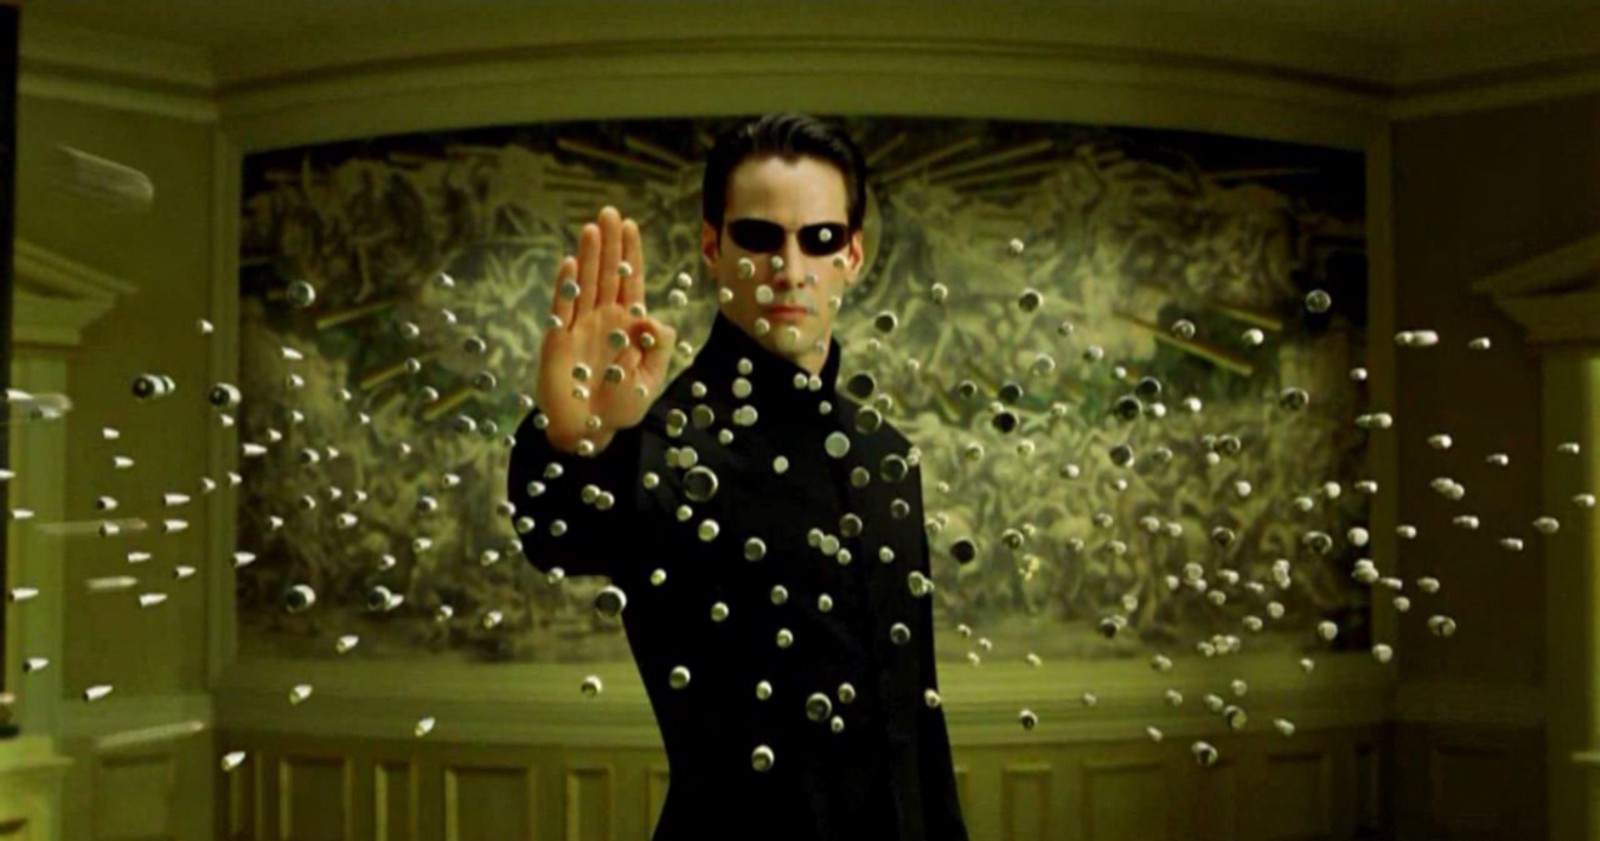 What’s Your IQ, Based Only on Your Opinions About Movies? The Matrix